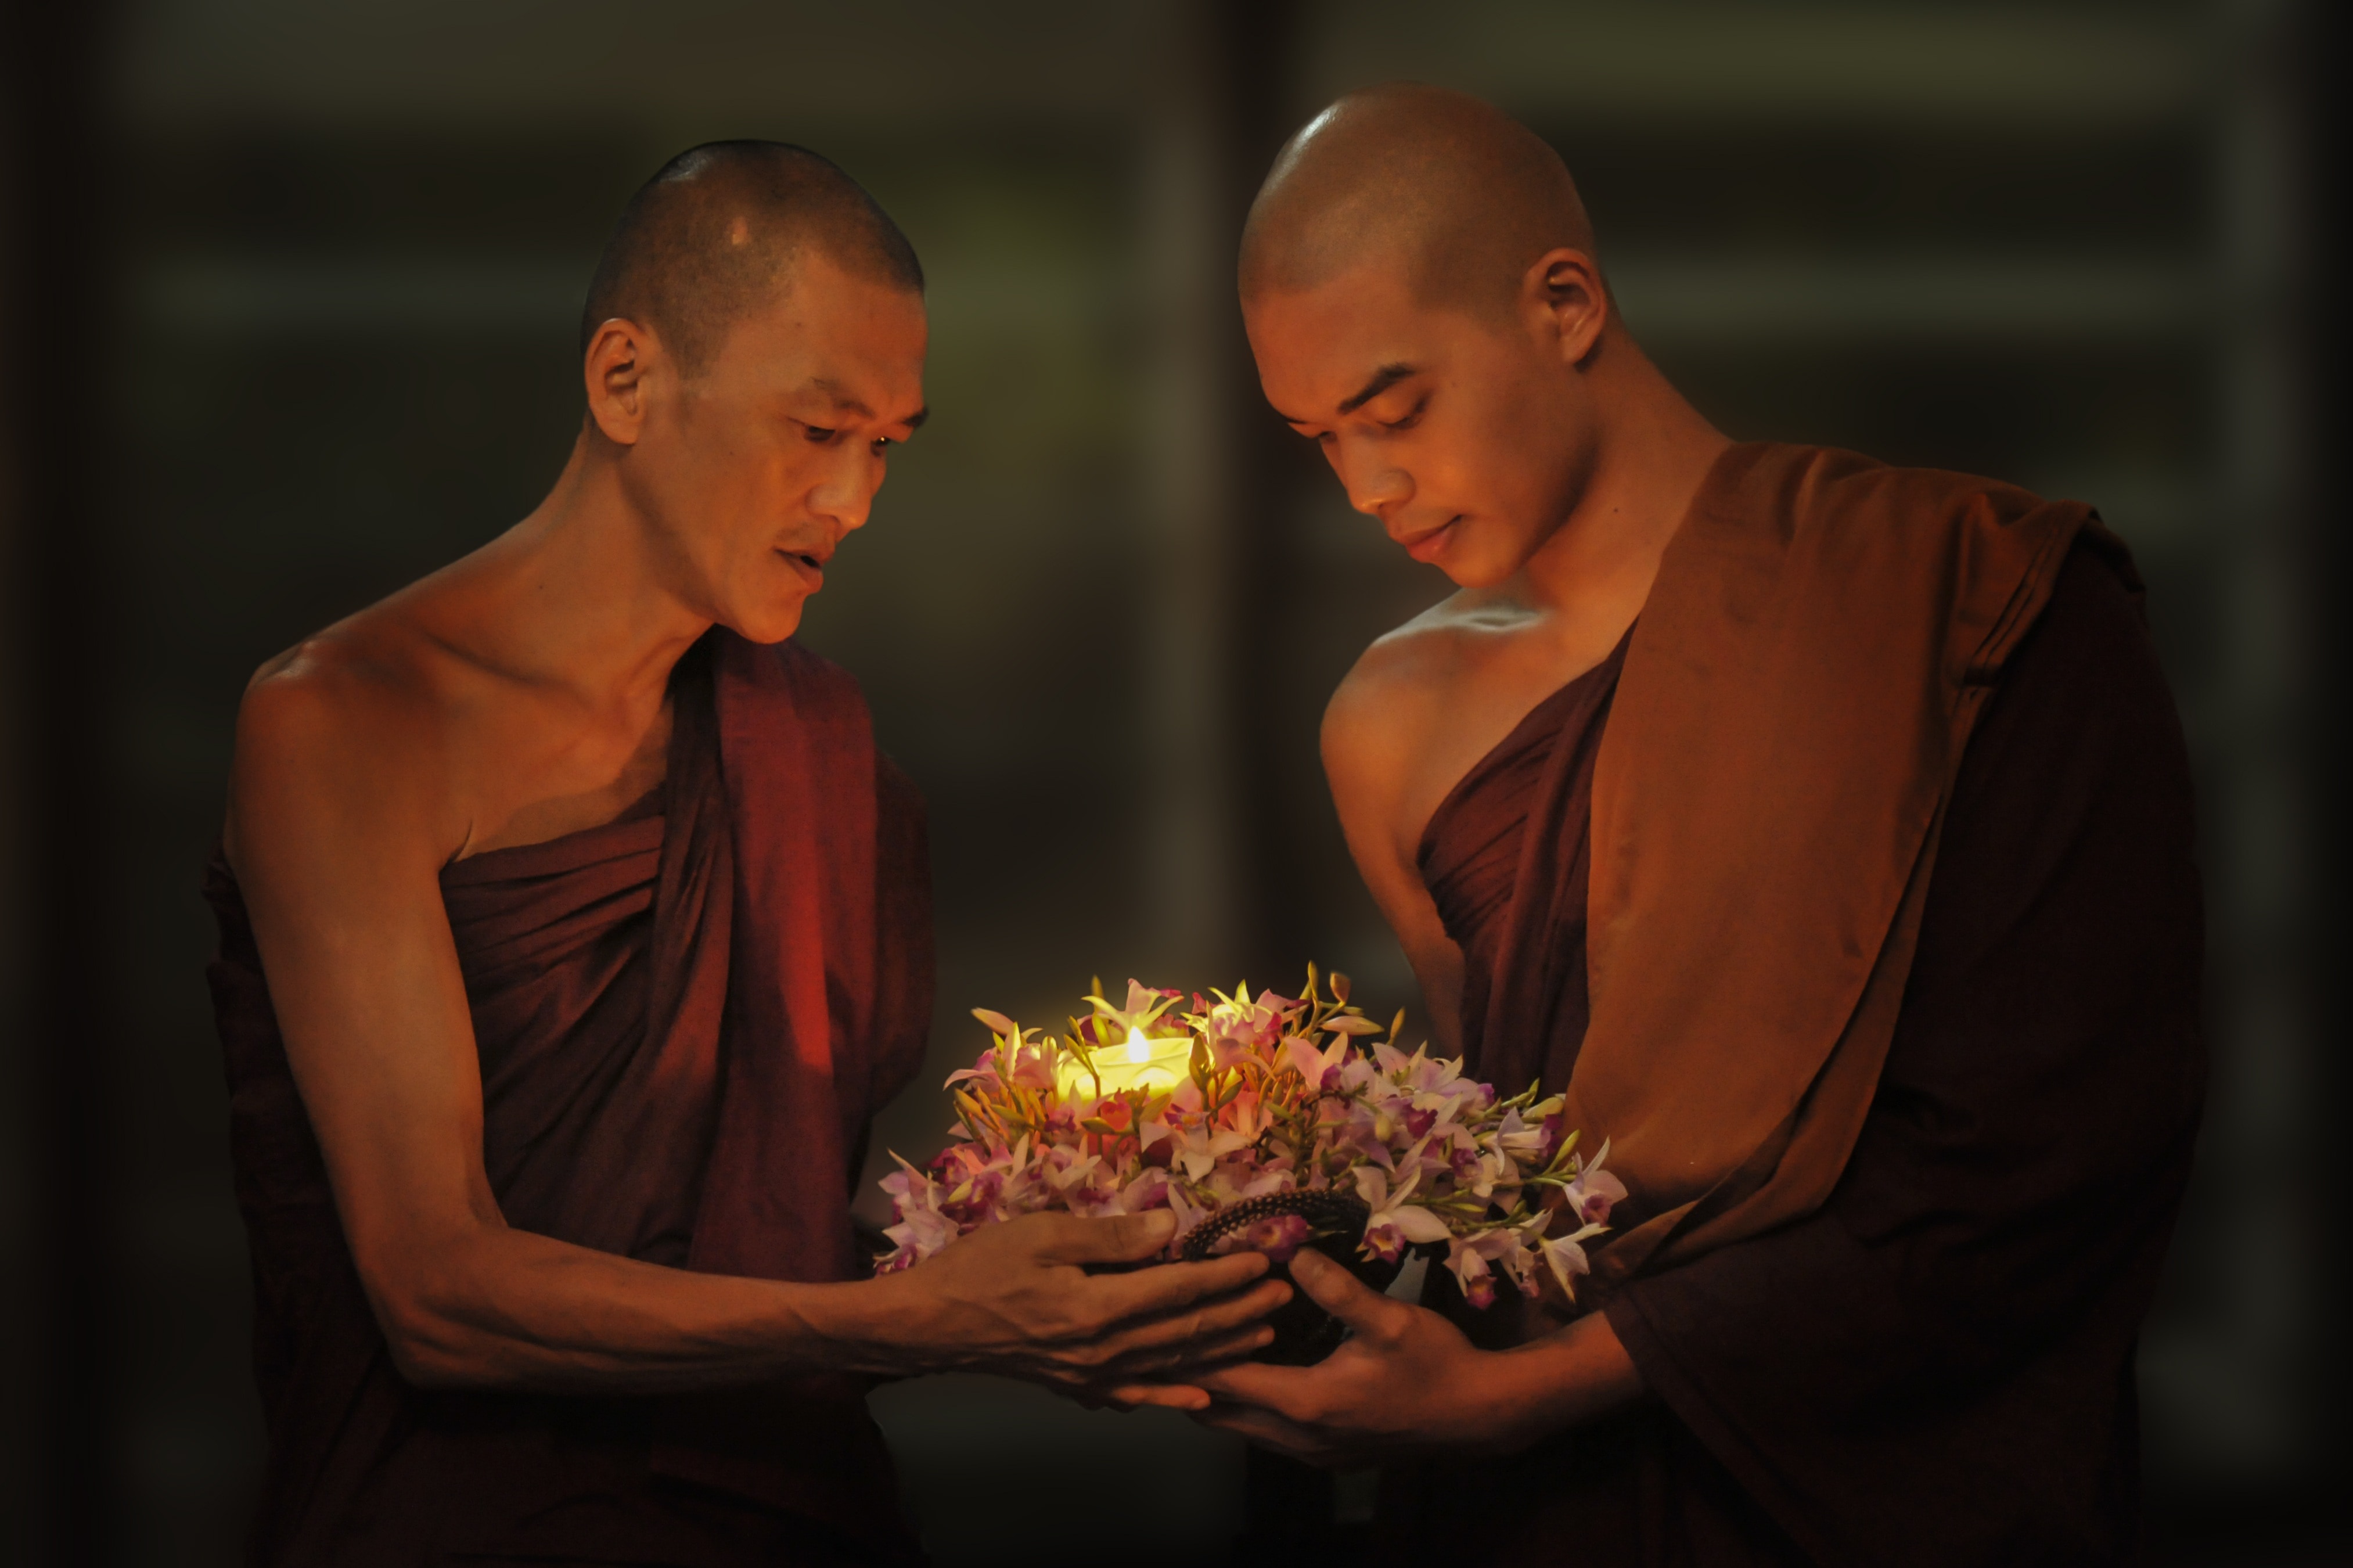 2 men in brown robe holding brown floral candle stand